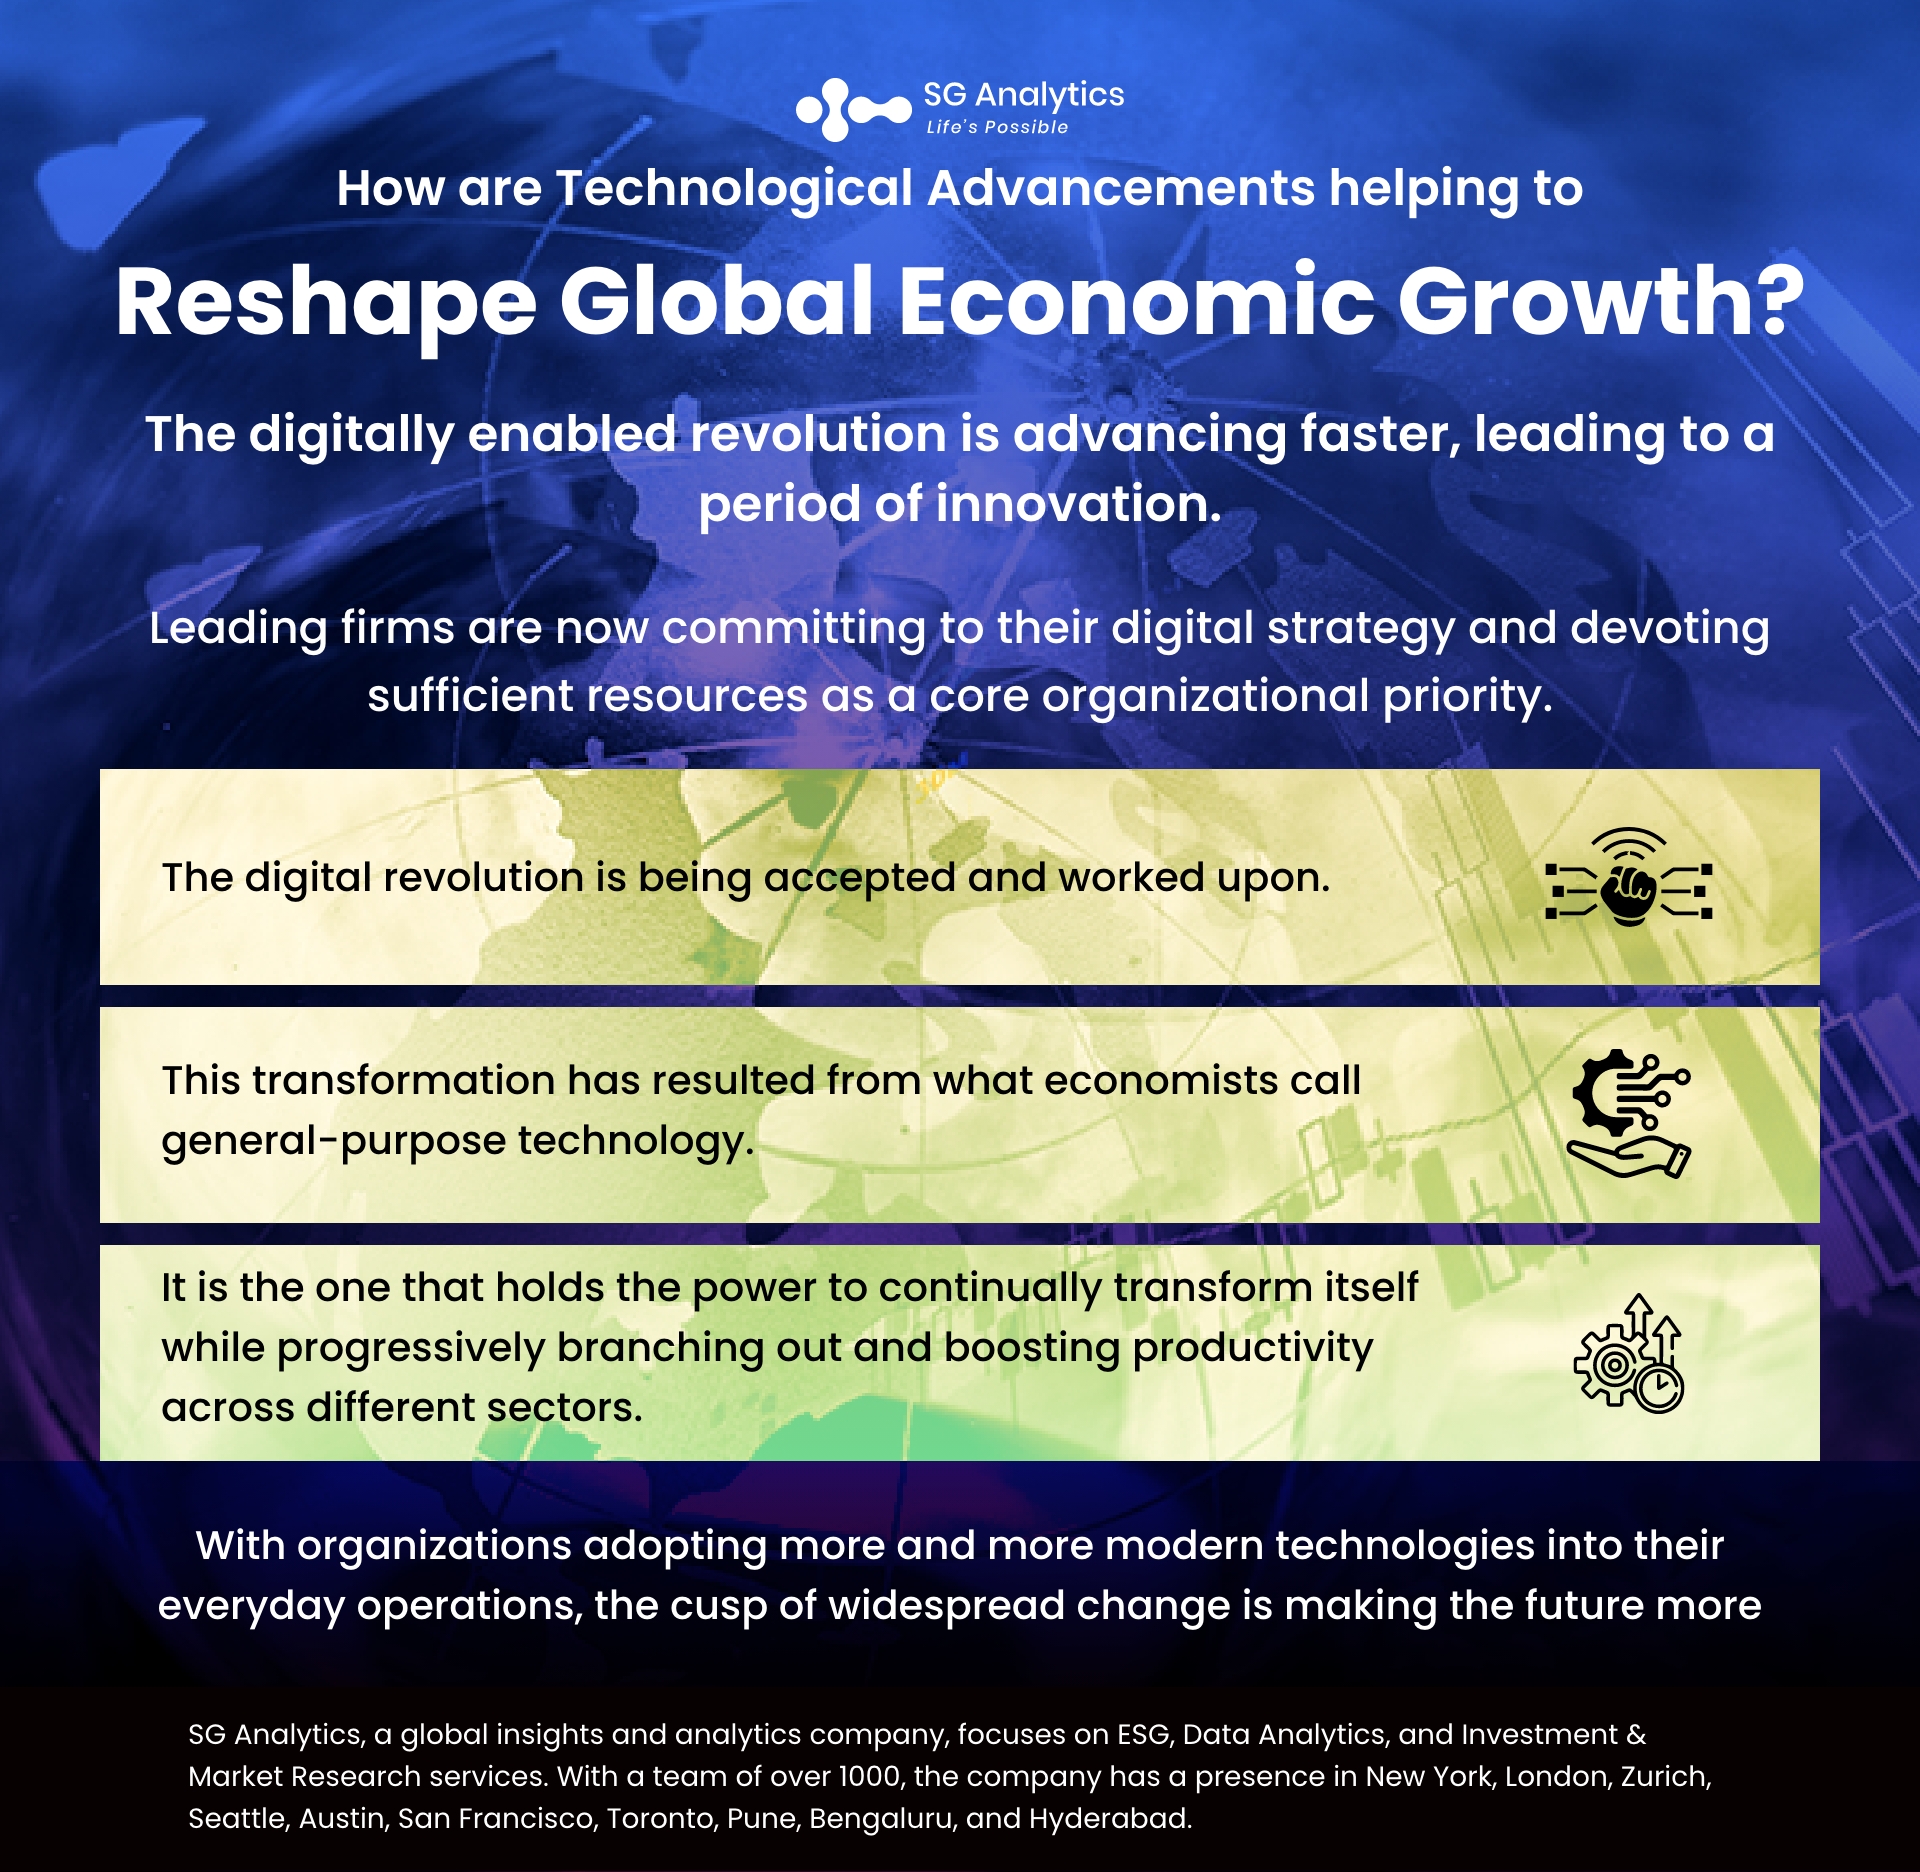 How are Technological Advancements helping to Reshape Global Economic Growth